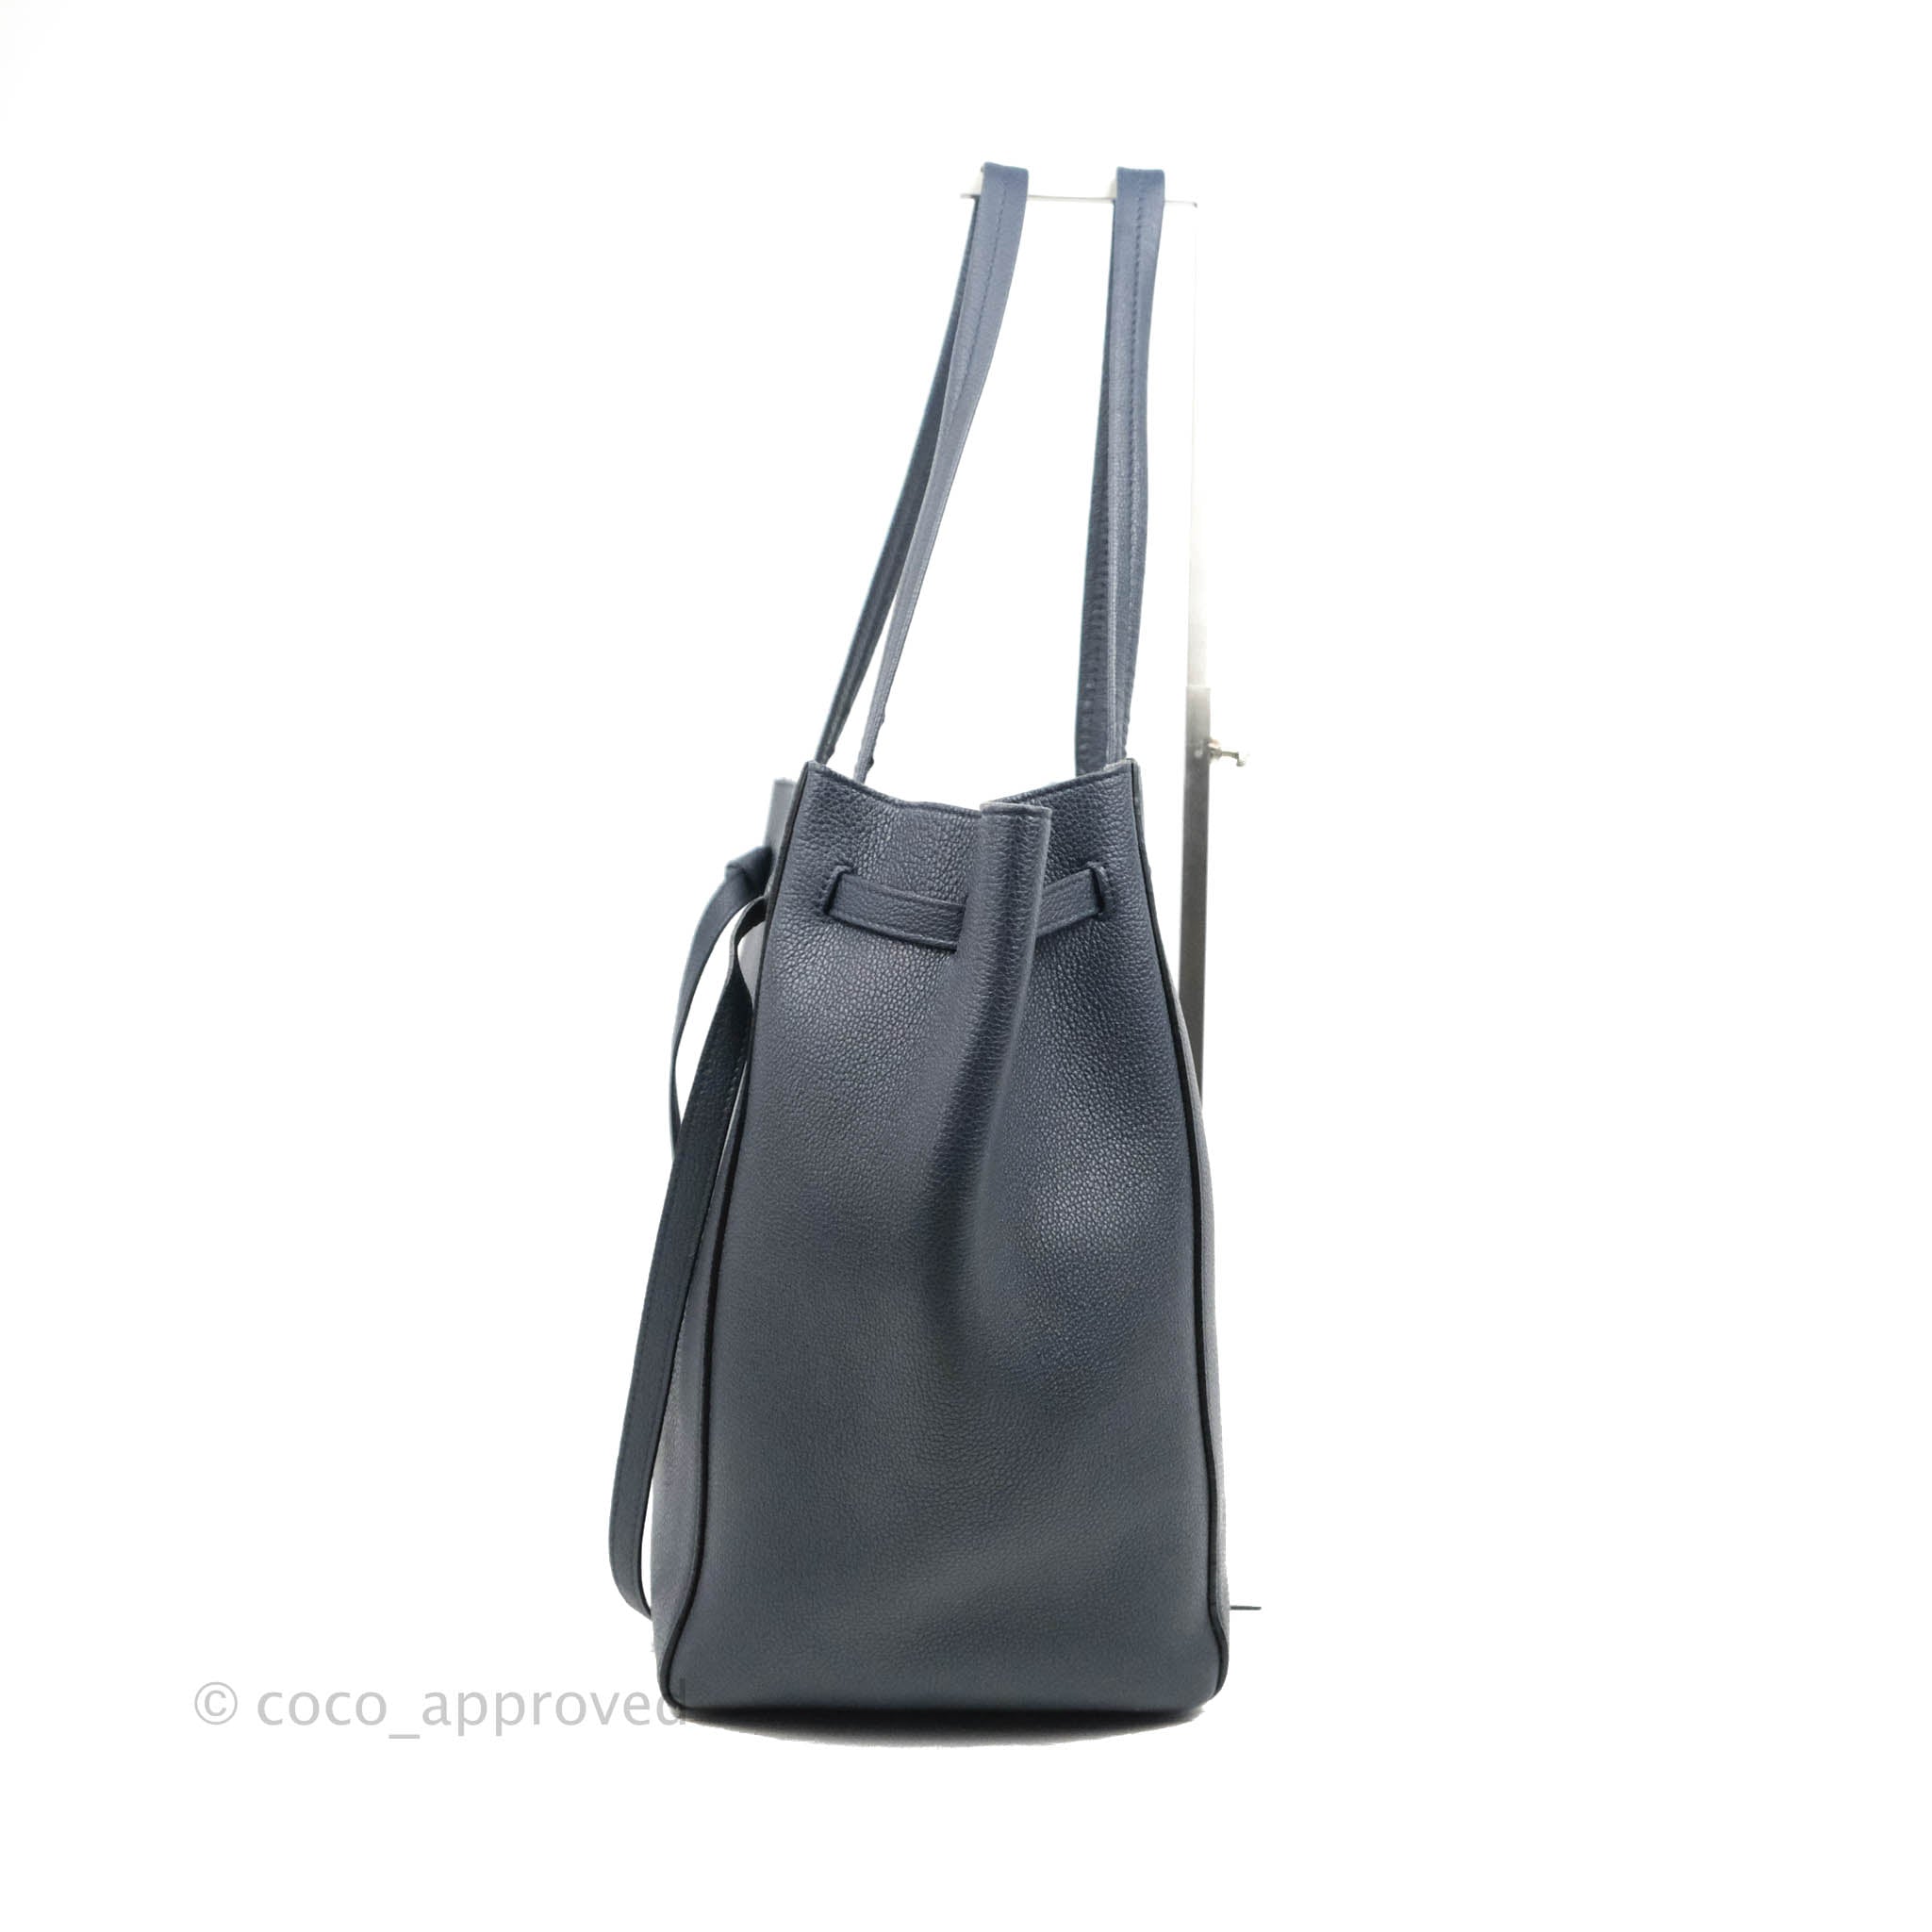 Celine Two-Tone Small Cabas Tote Bag White Black Grained Calfskin Leather